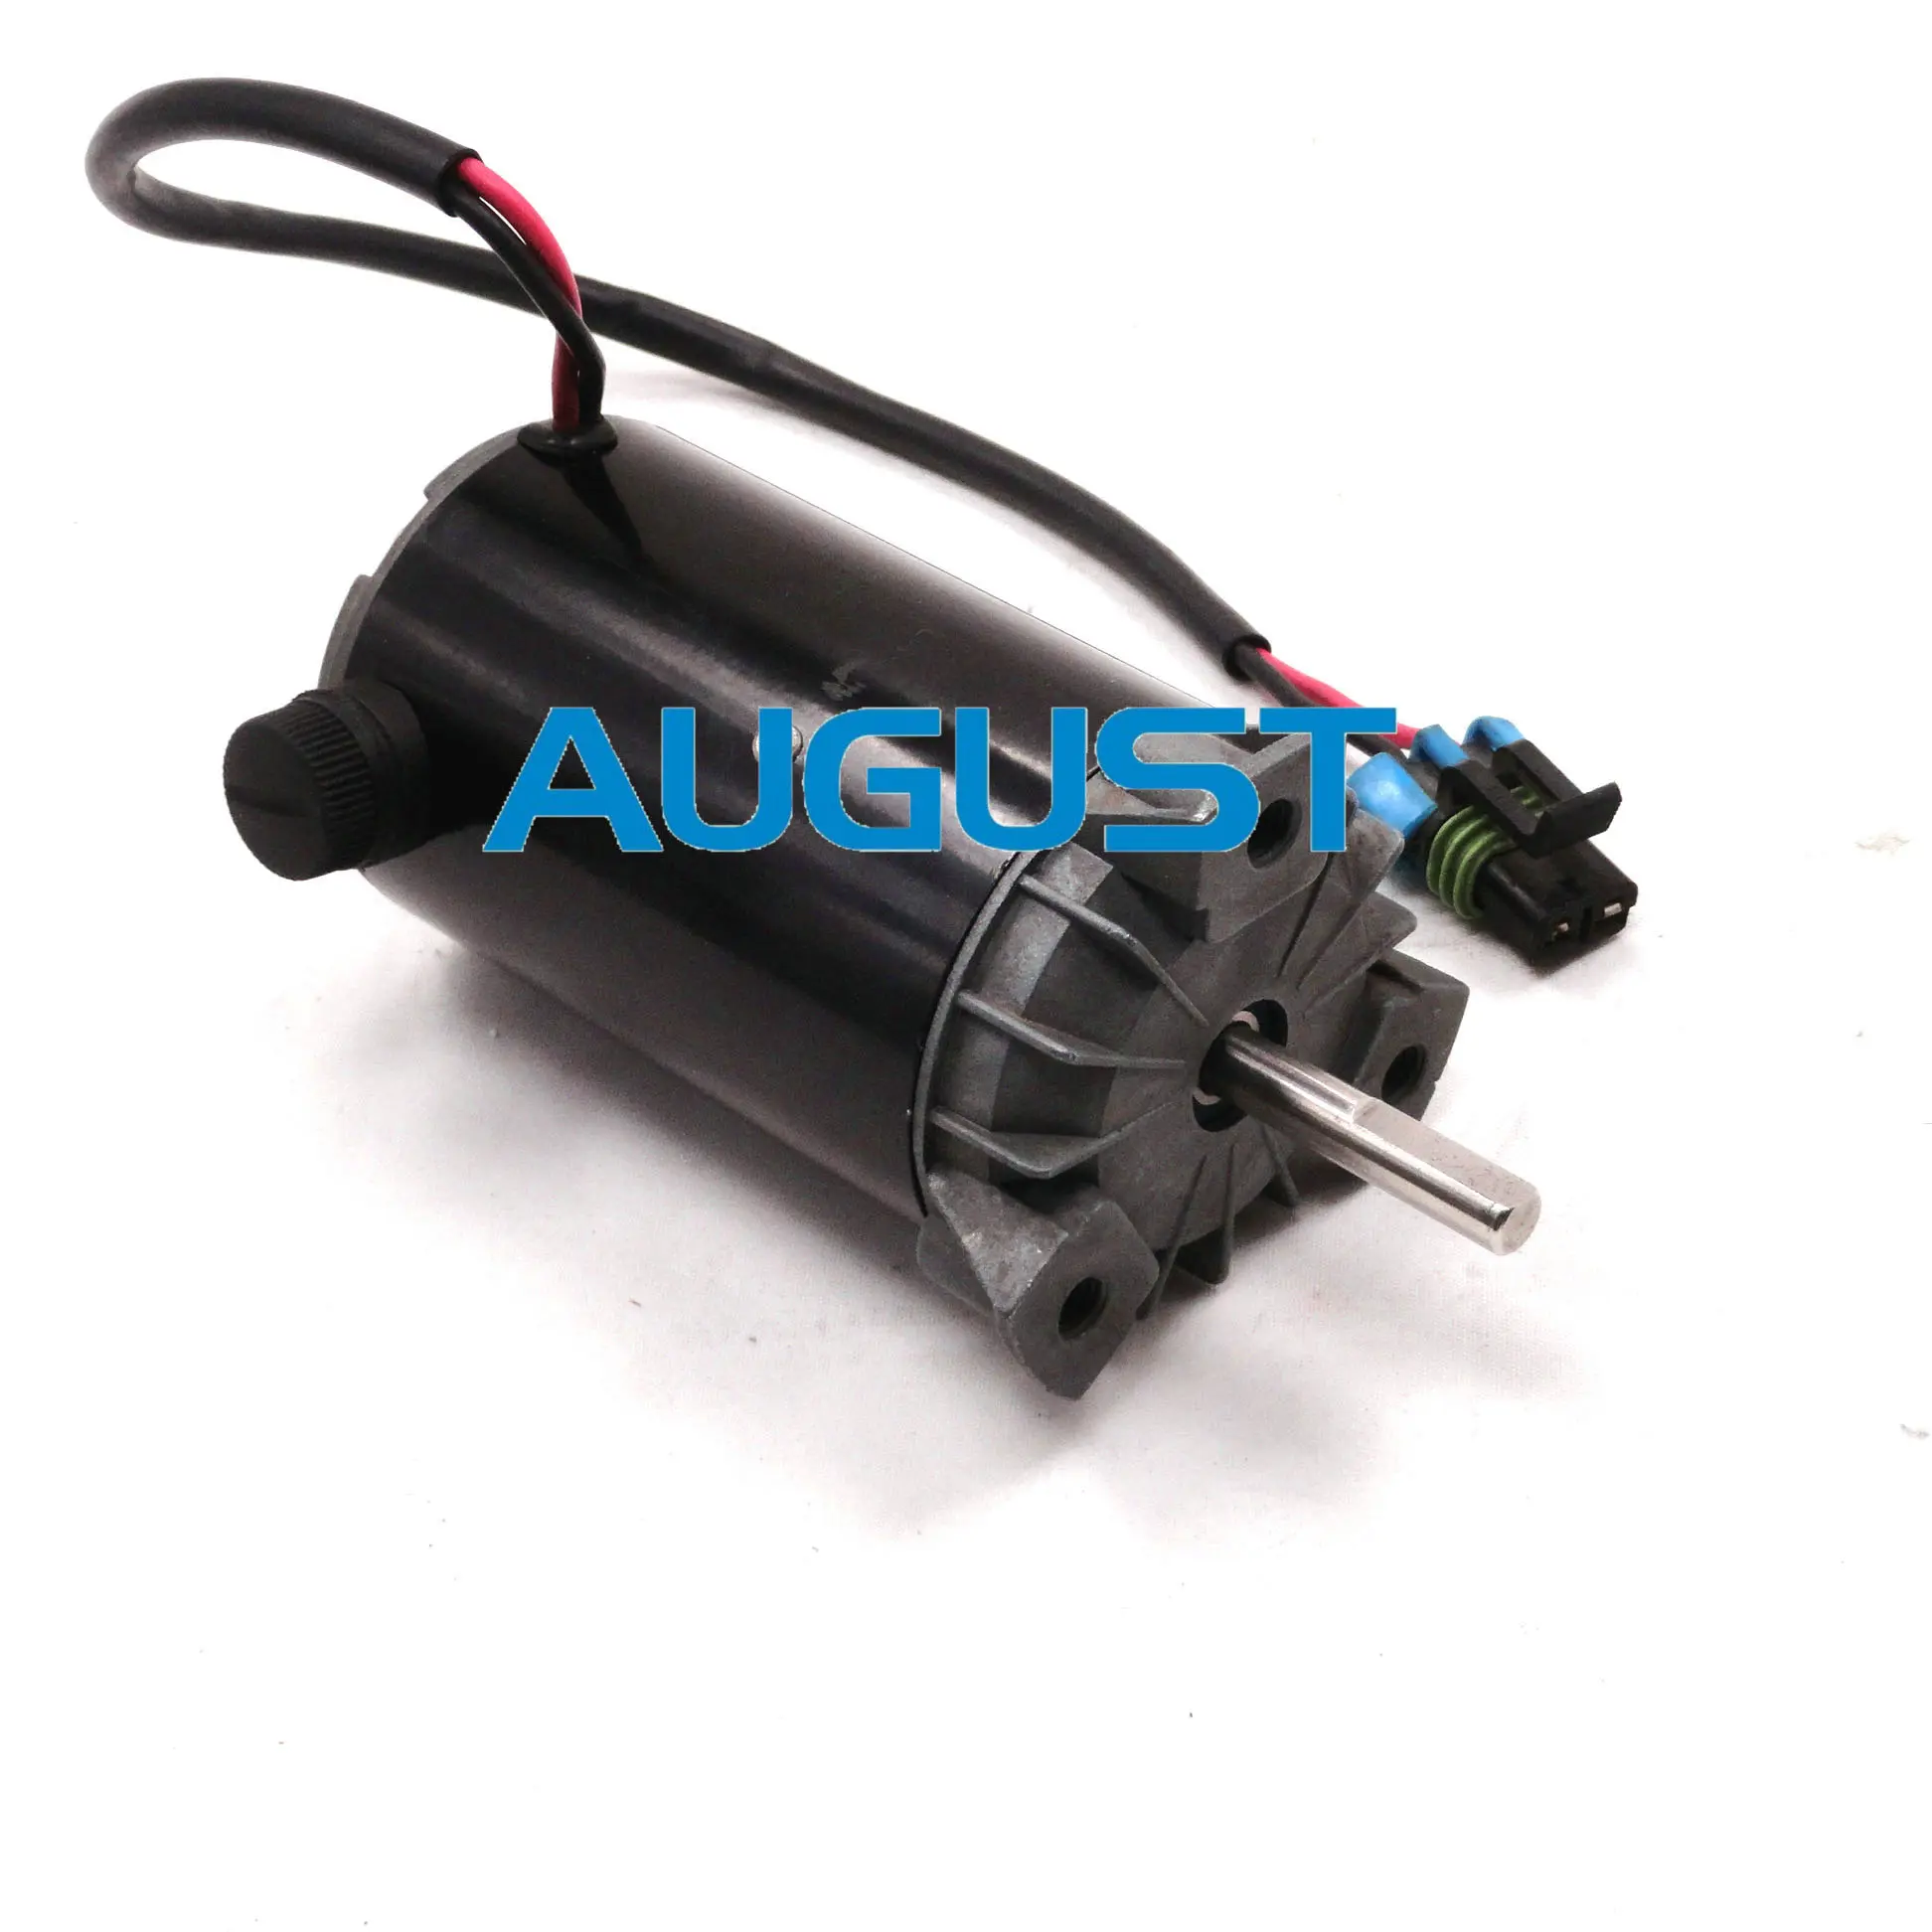 China wholesale Bus Air Conditioning Spal 006-B40-22 Evaporator Blower Suppliers – Water Temperature Sensor Switch 41-6539 Thermo King SB / SL / TS Models – AUGUST